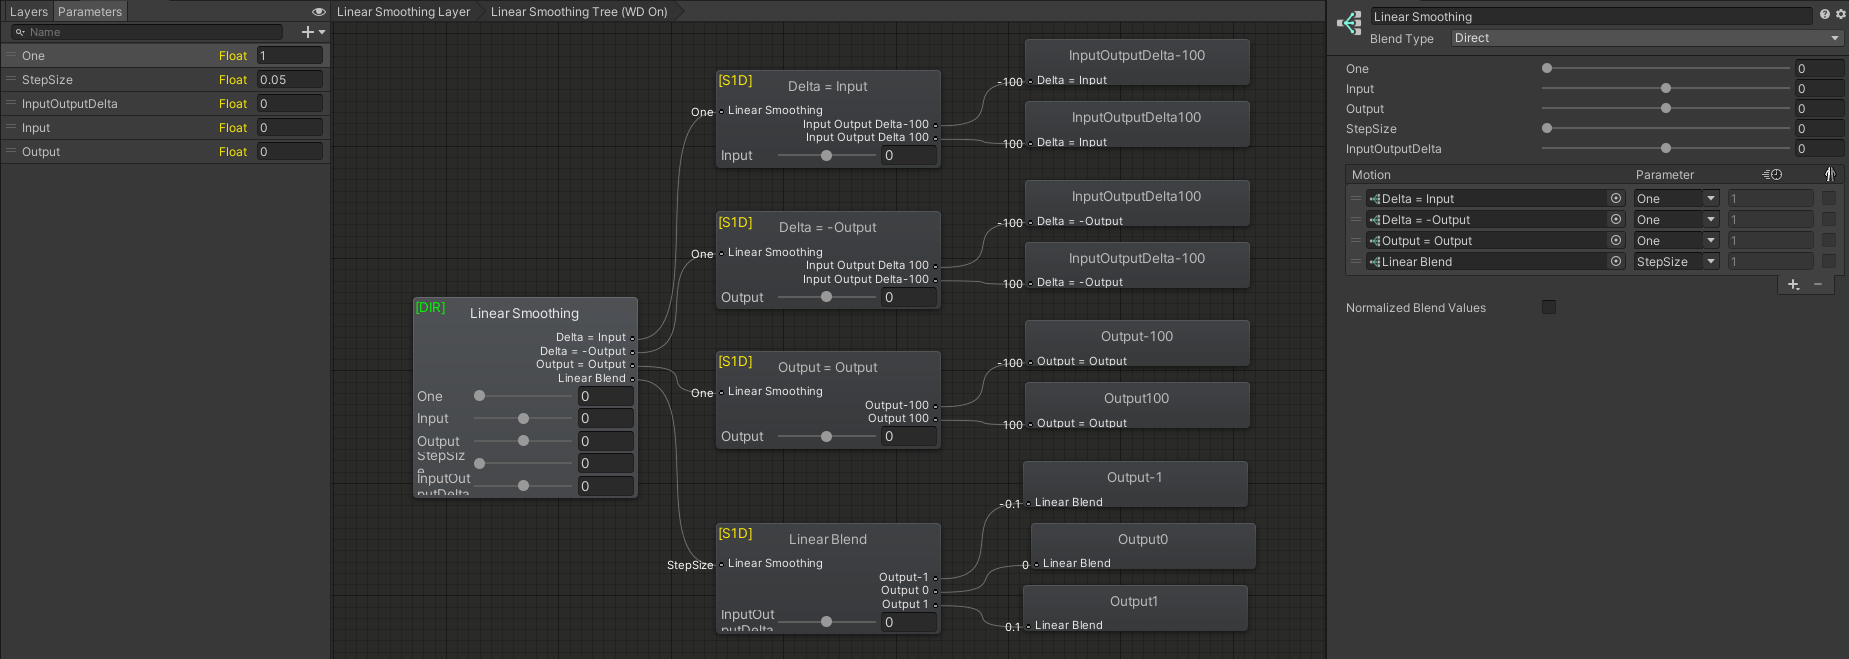 An example of an Linear Smoothing Blend Tree.